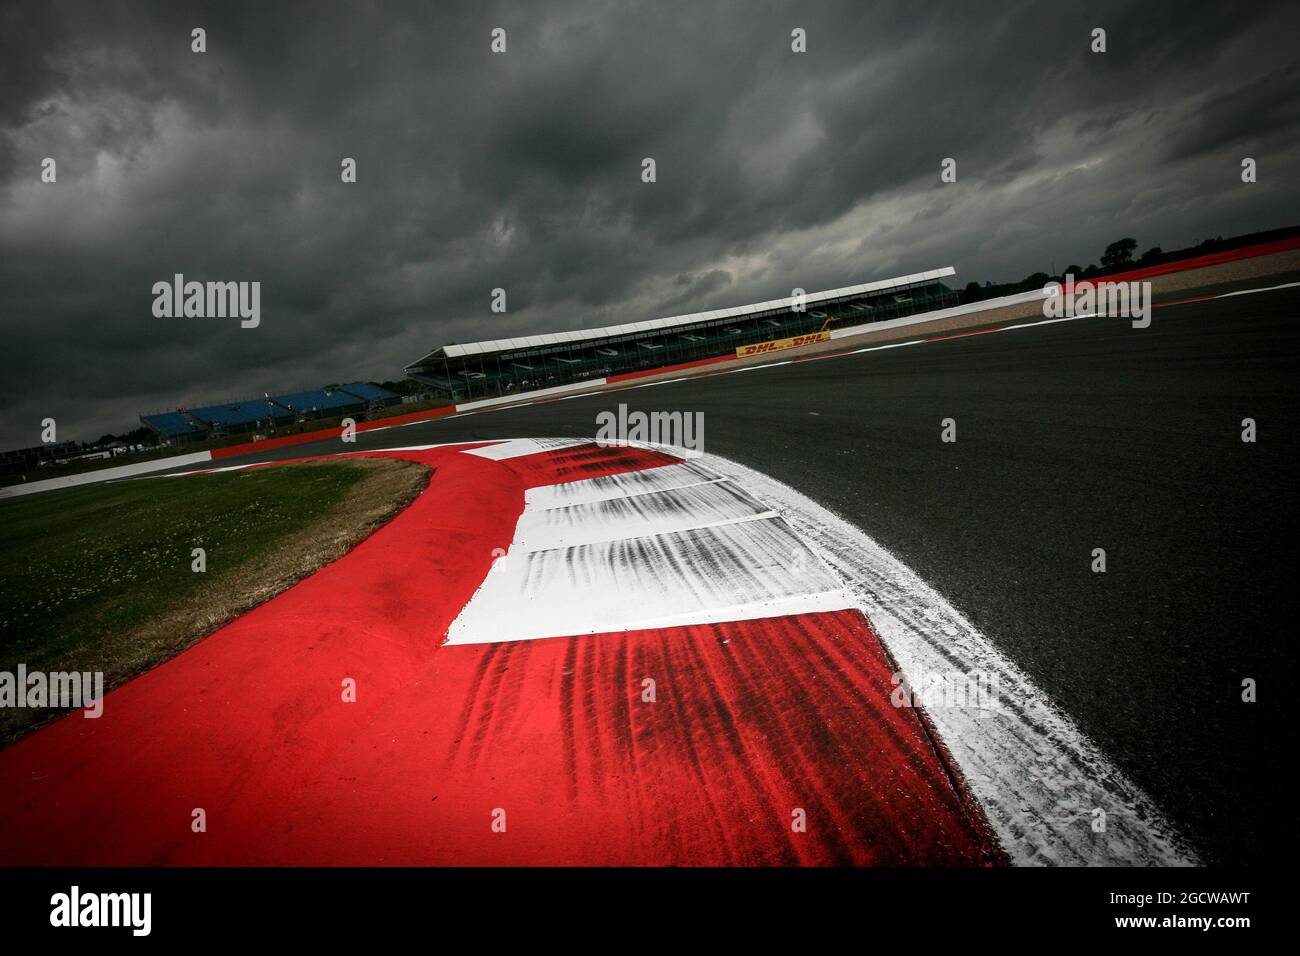 The circuit with dark clouds looming over it. British Grand Prix, Thursday 2nd July 2015. Silverstone, England. Stock Photo